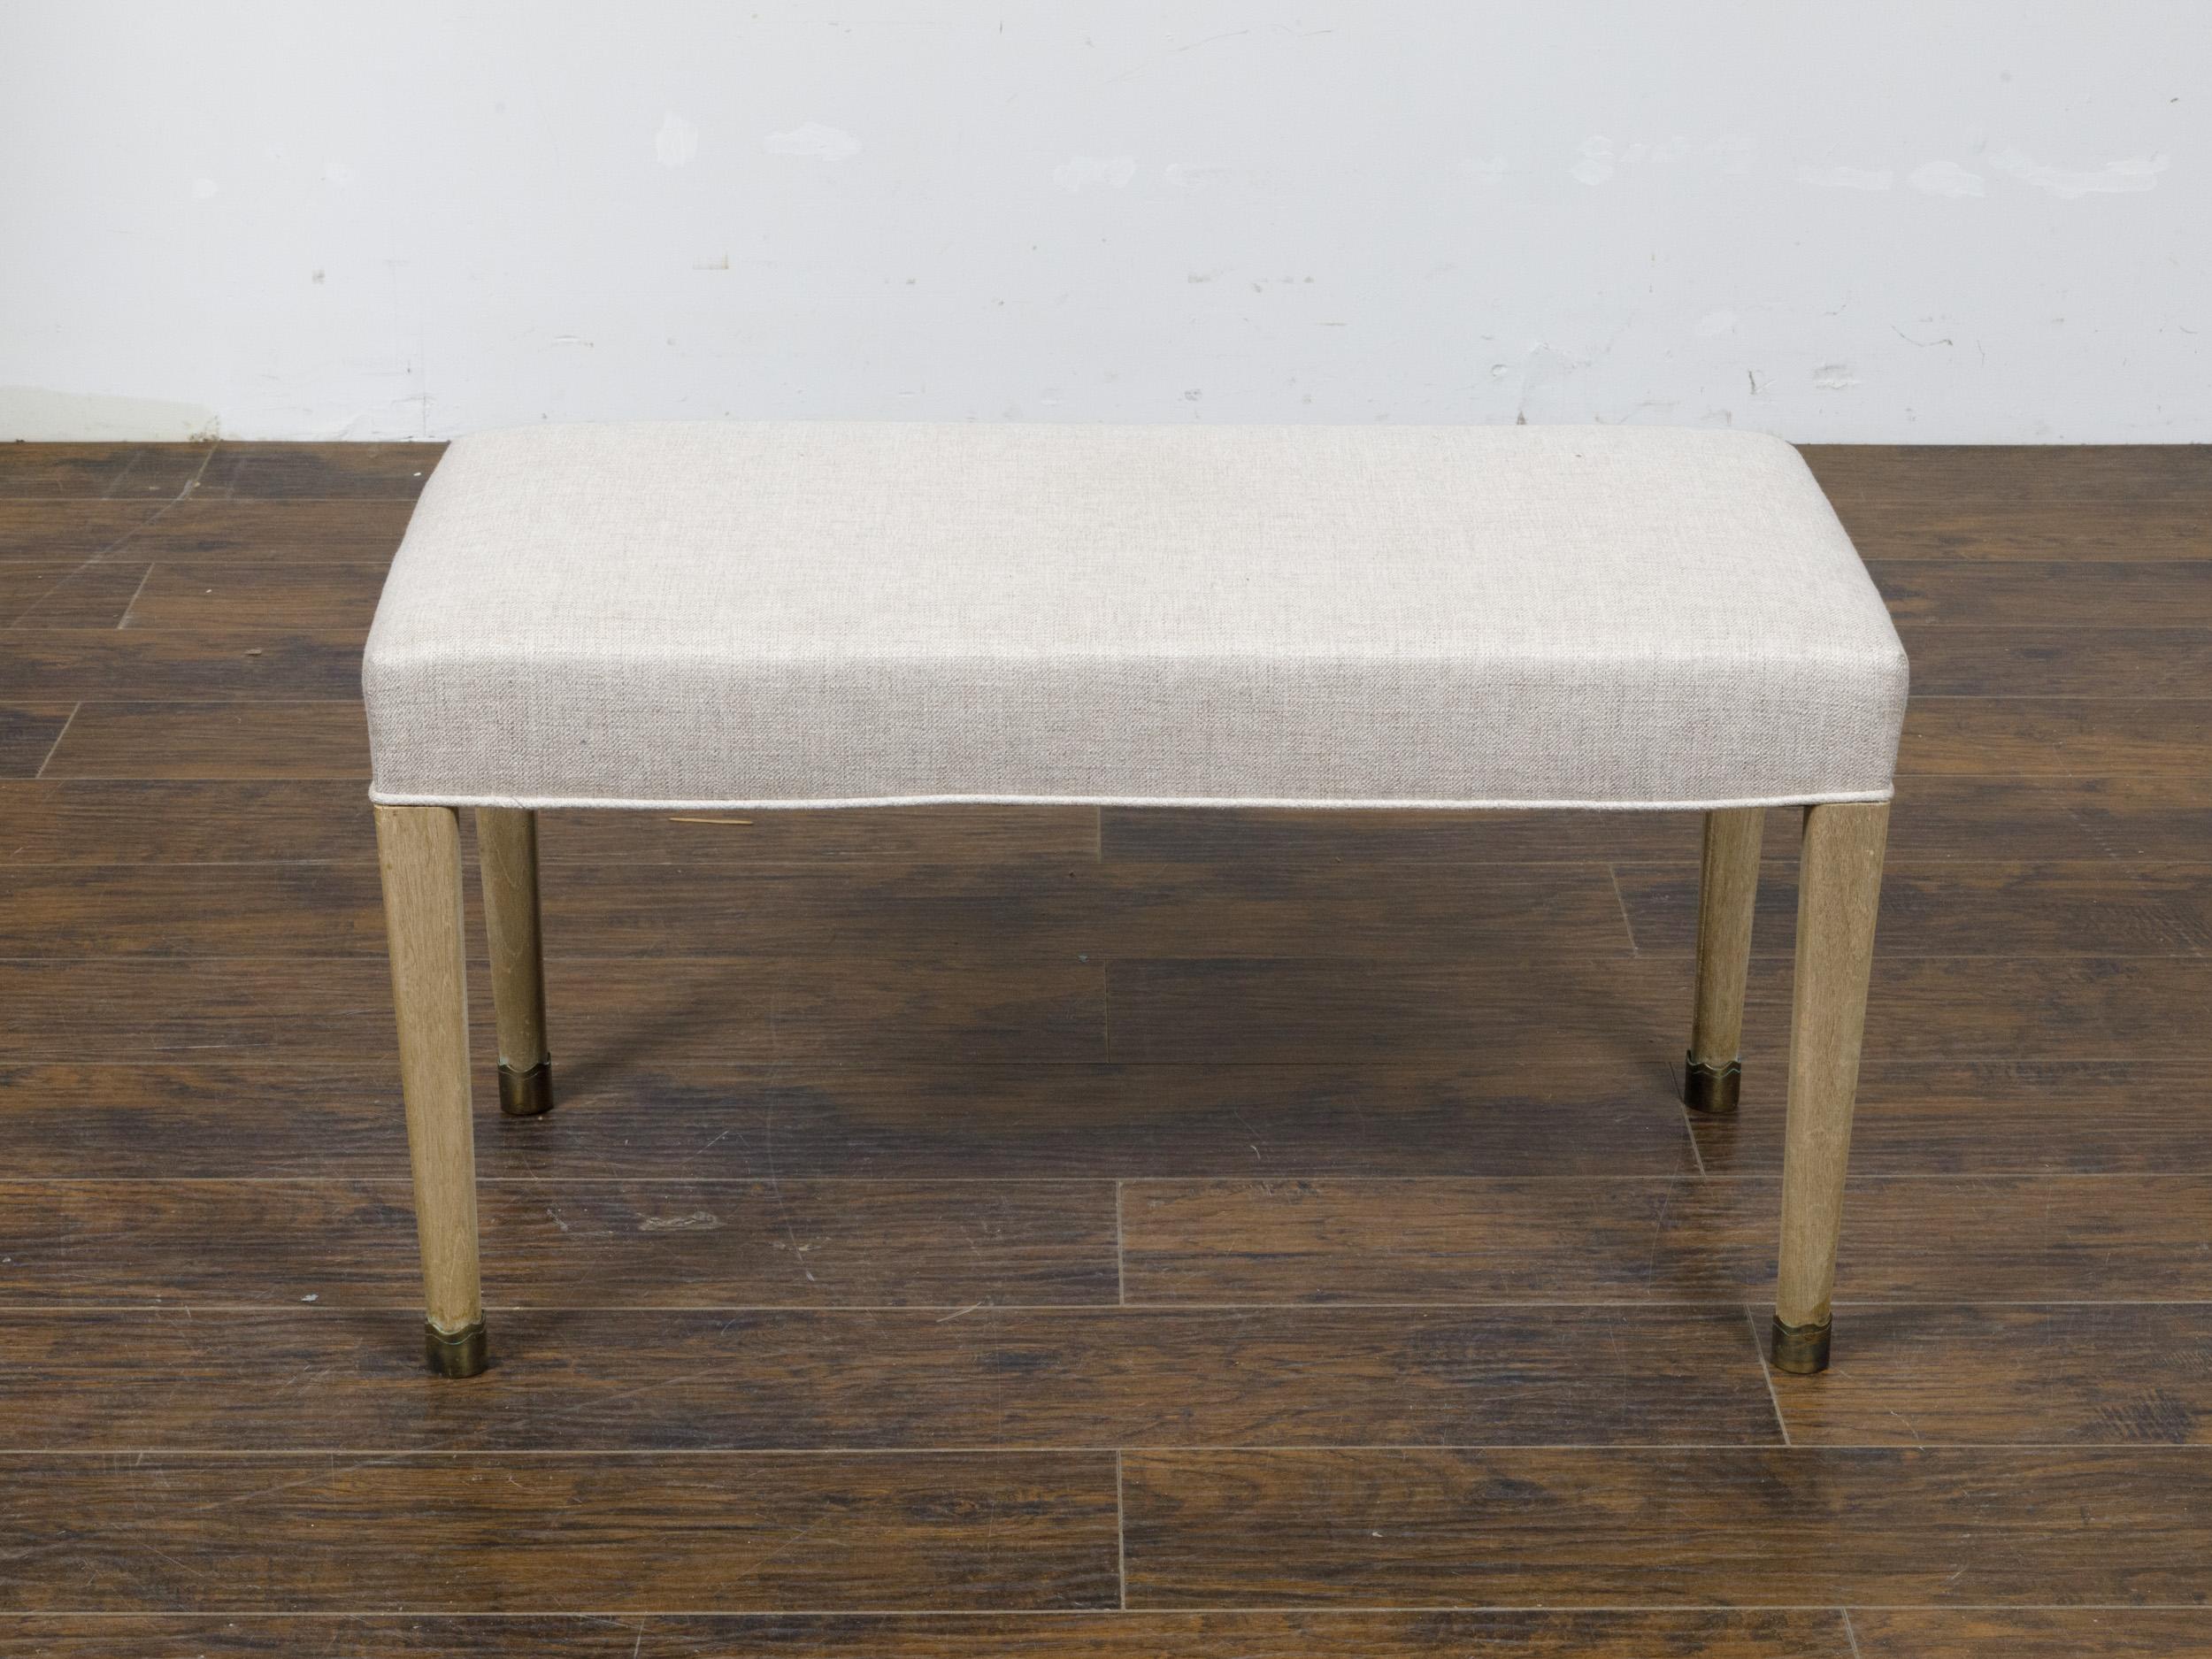 20th Century French Art Deco 1930s Bleached Walnut Bench with Brass Feet and Upholstery For Sale